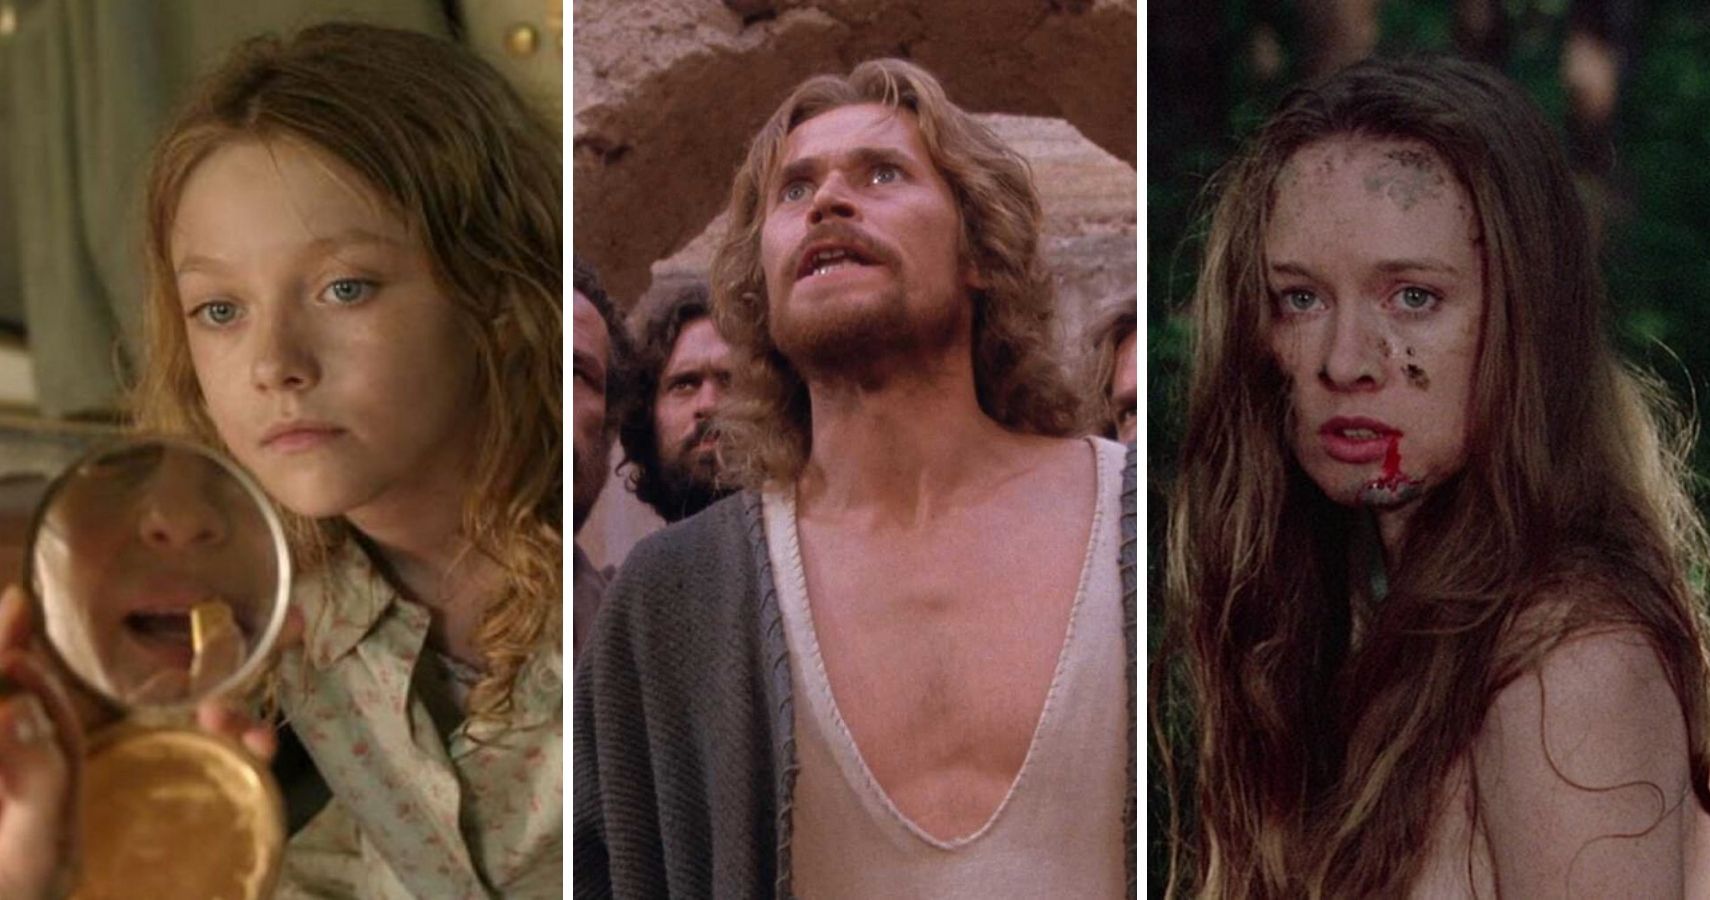 The 10 Most Offensive Movies Ever Made (& Their Rotten Tomatoes Rating)